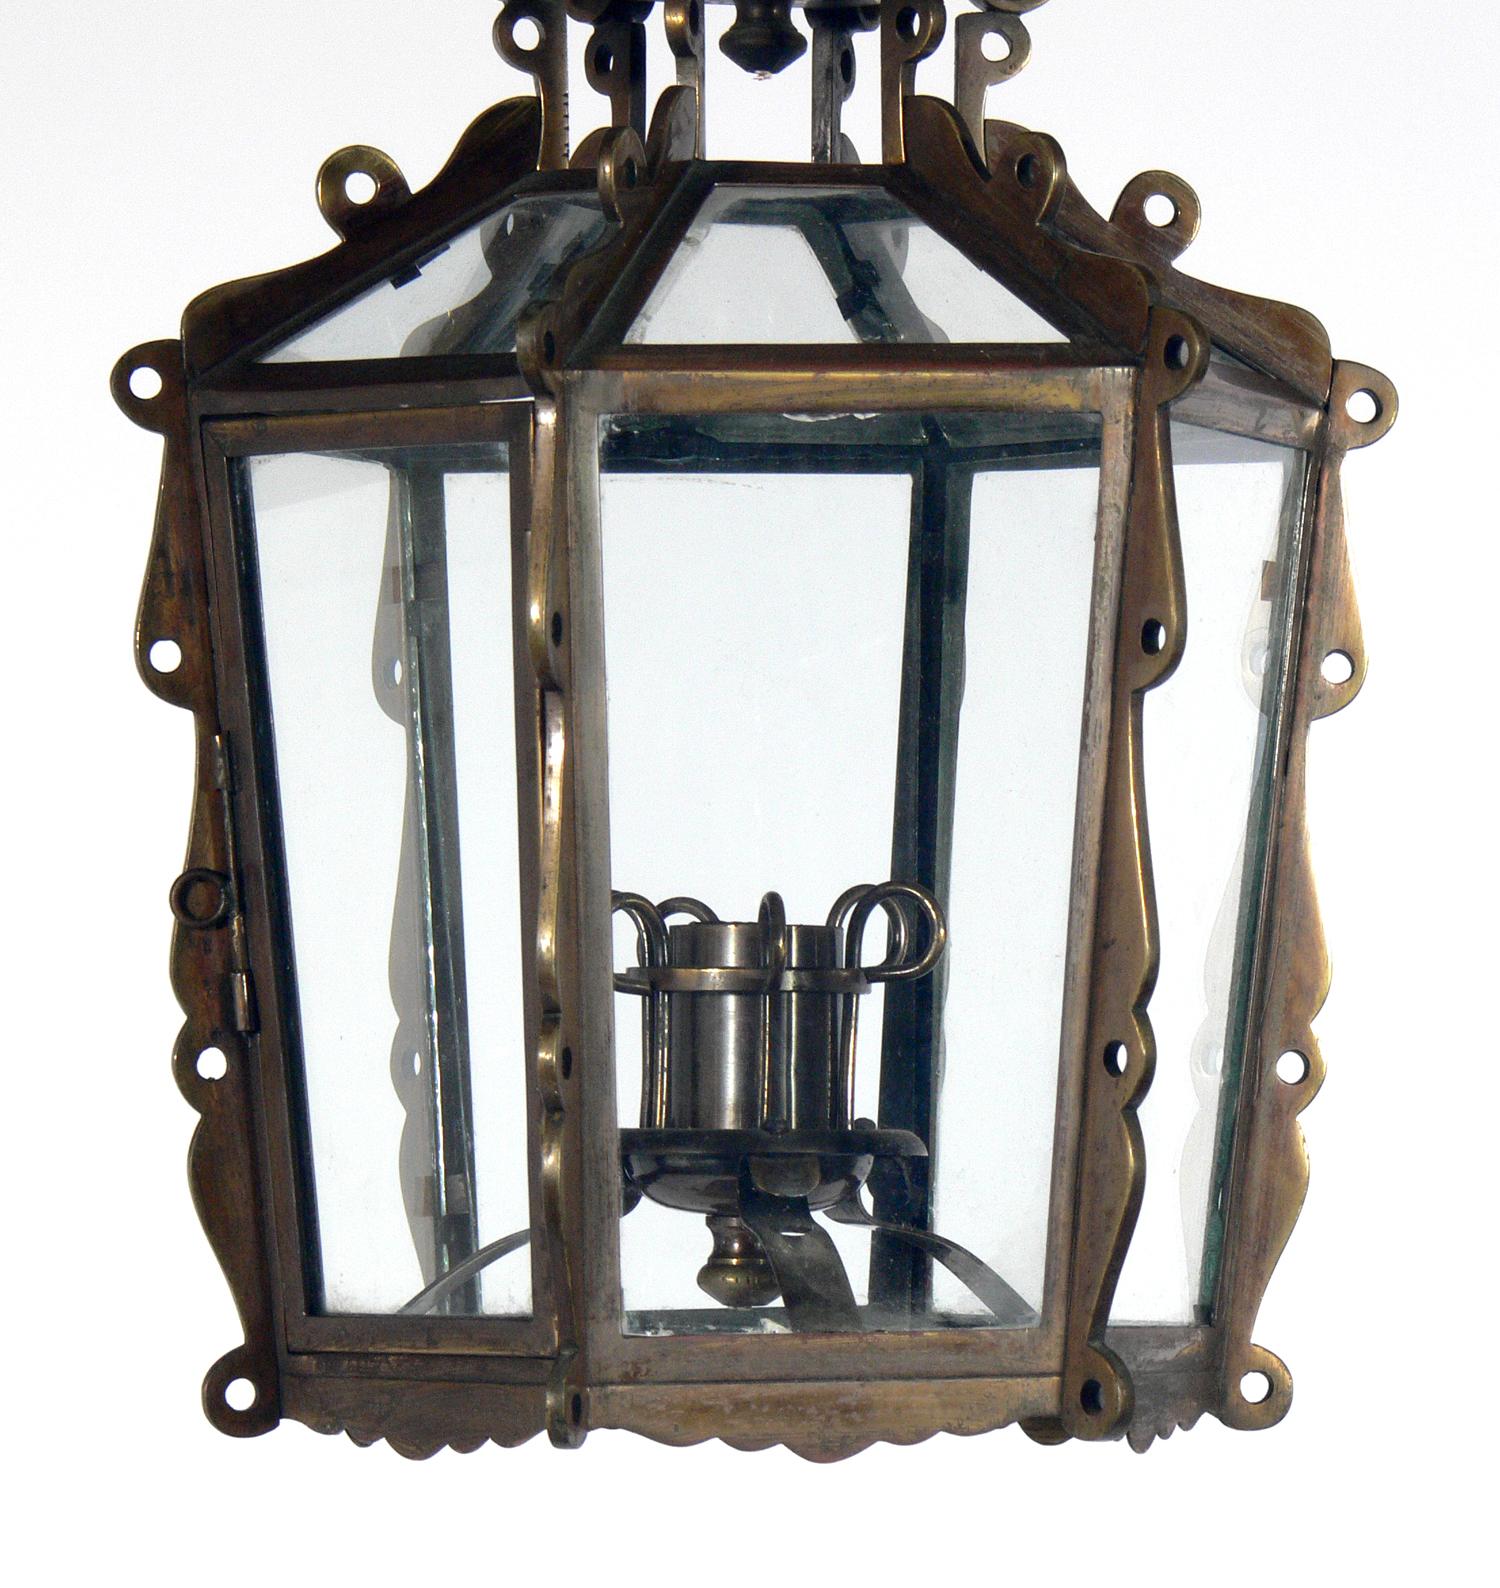 Elegant brass lantern or pendant light, in the manner of Tommi Parzinger, American, circa 1940s. Perfect size for a foyer or hallway. Retains warm original patina. It has been rewired and is ready to mount.